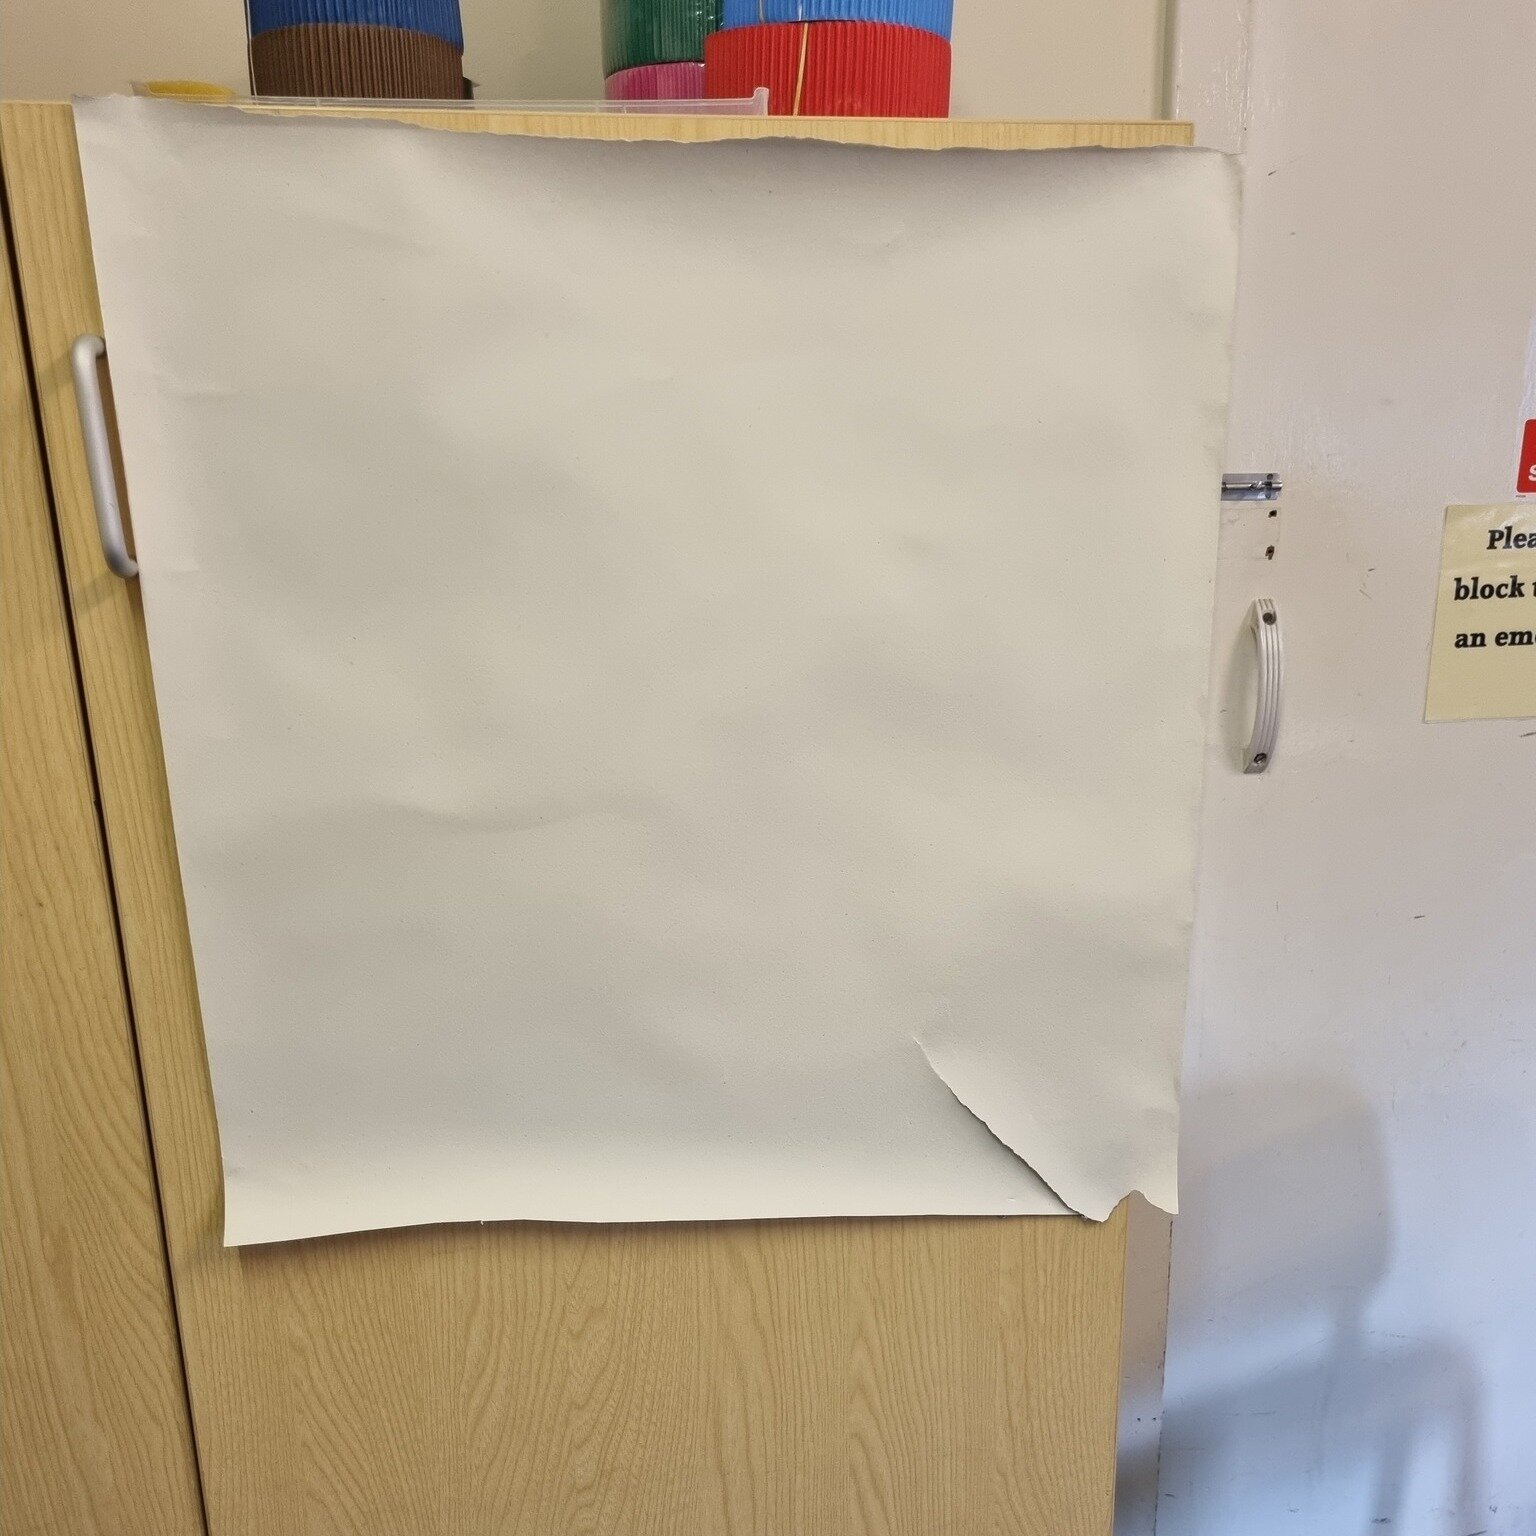 This is the reality of teaching independently. So often you are hiring a room which has to be adapted to your needs. 

There's no whiteboard - interactive or just plain old ordinary.

You often have to set out the tables and chairs.

Sometimes it's a